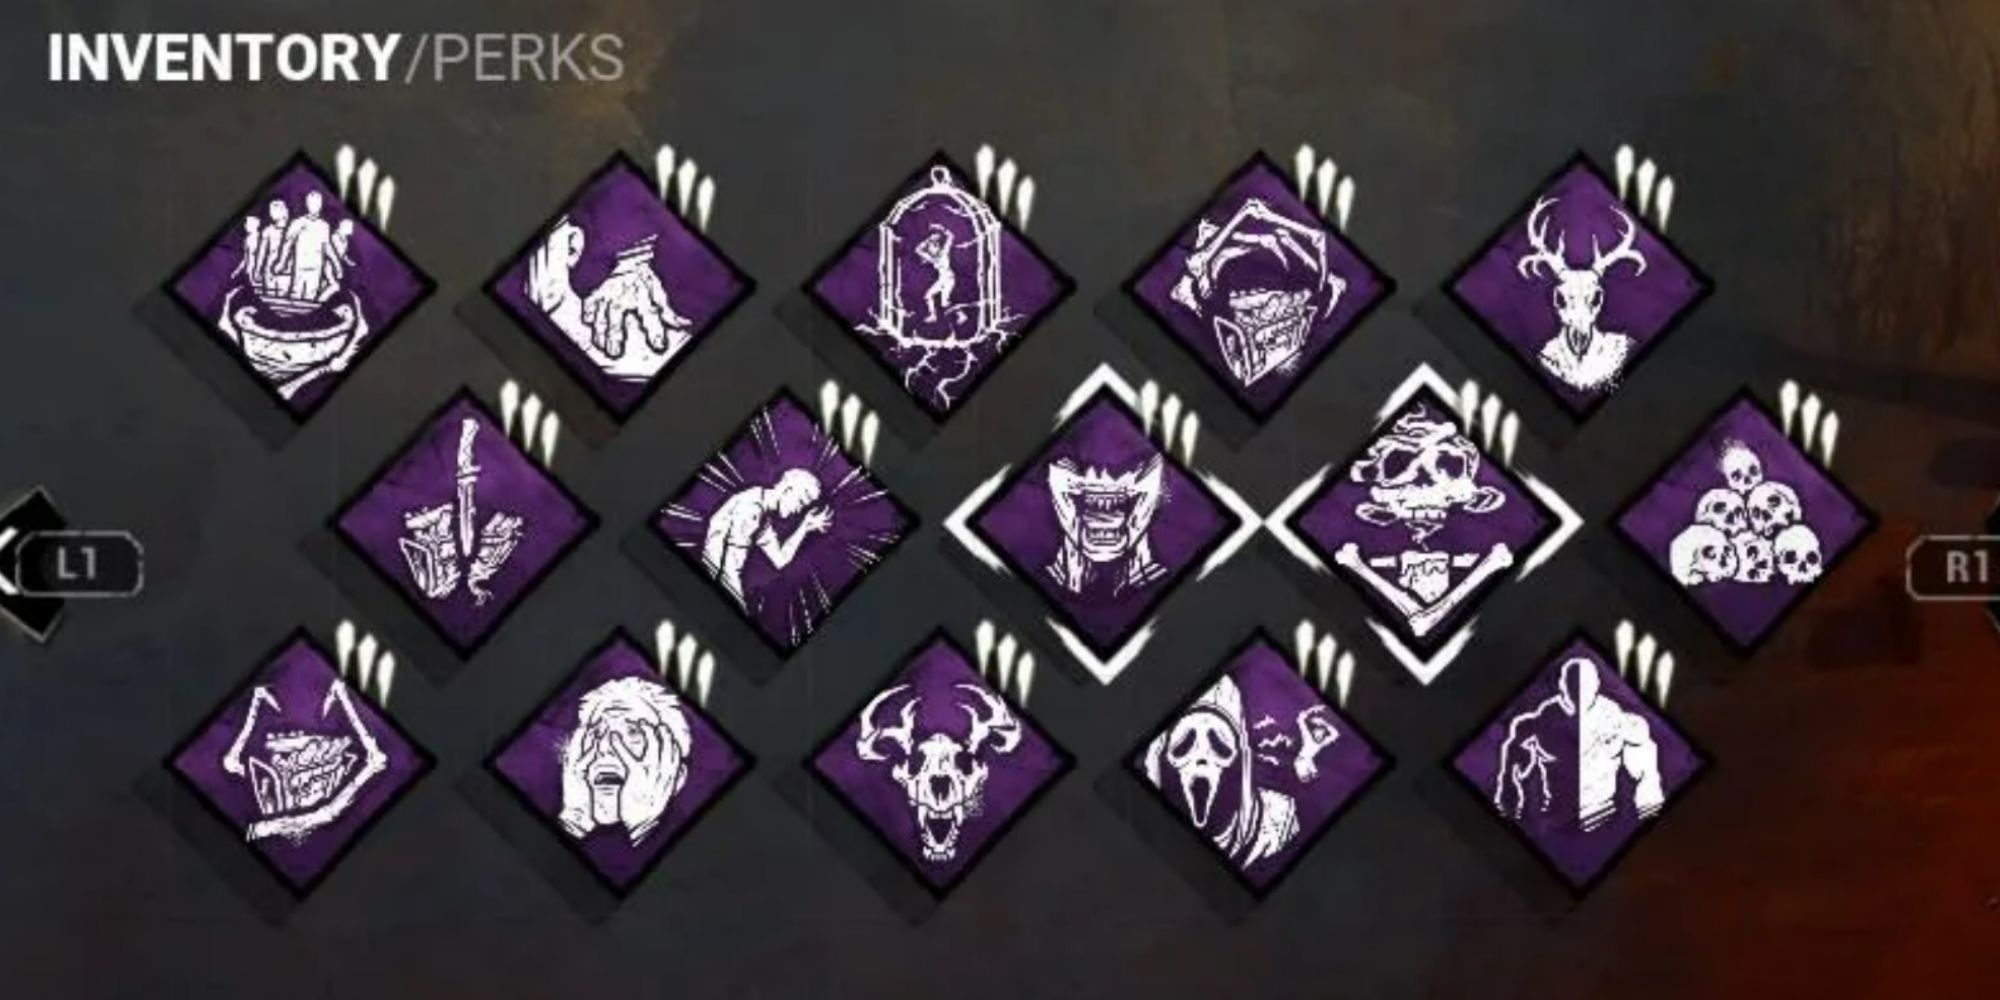 The icons for many of the killer perks in Dead By Daylight